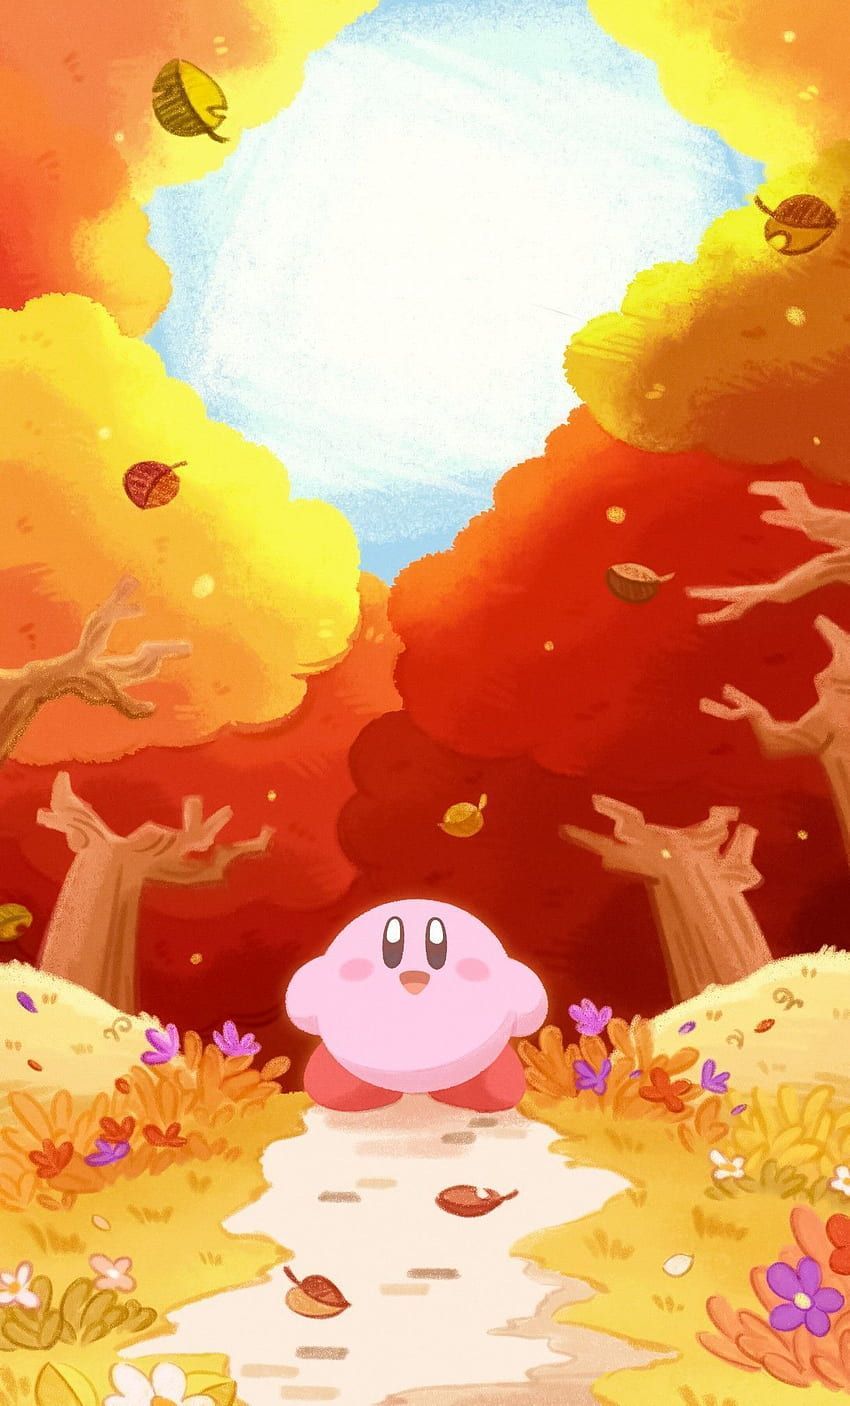 Kirby in the autumn forest - Kirby